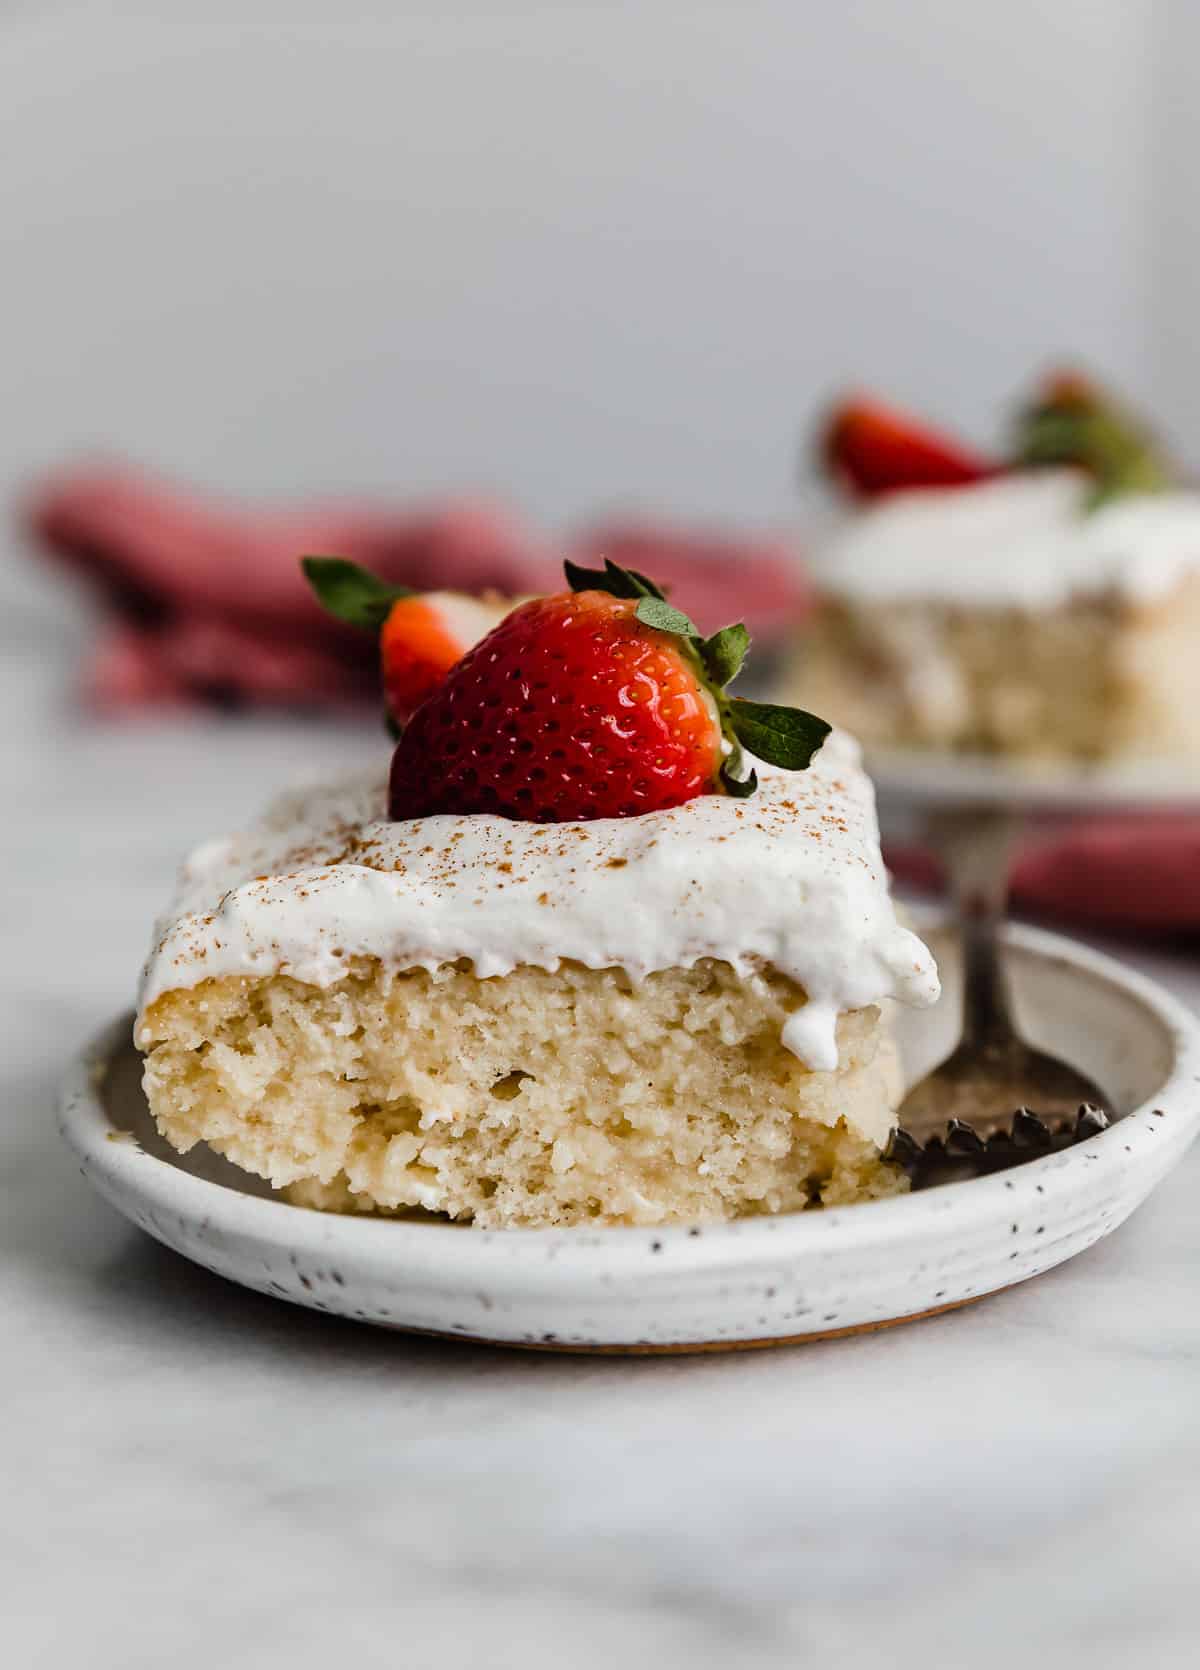 A slice of Tres Leches Cake on a white plate, with a fresh strawberry on the whipped cream.